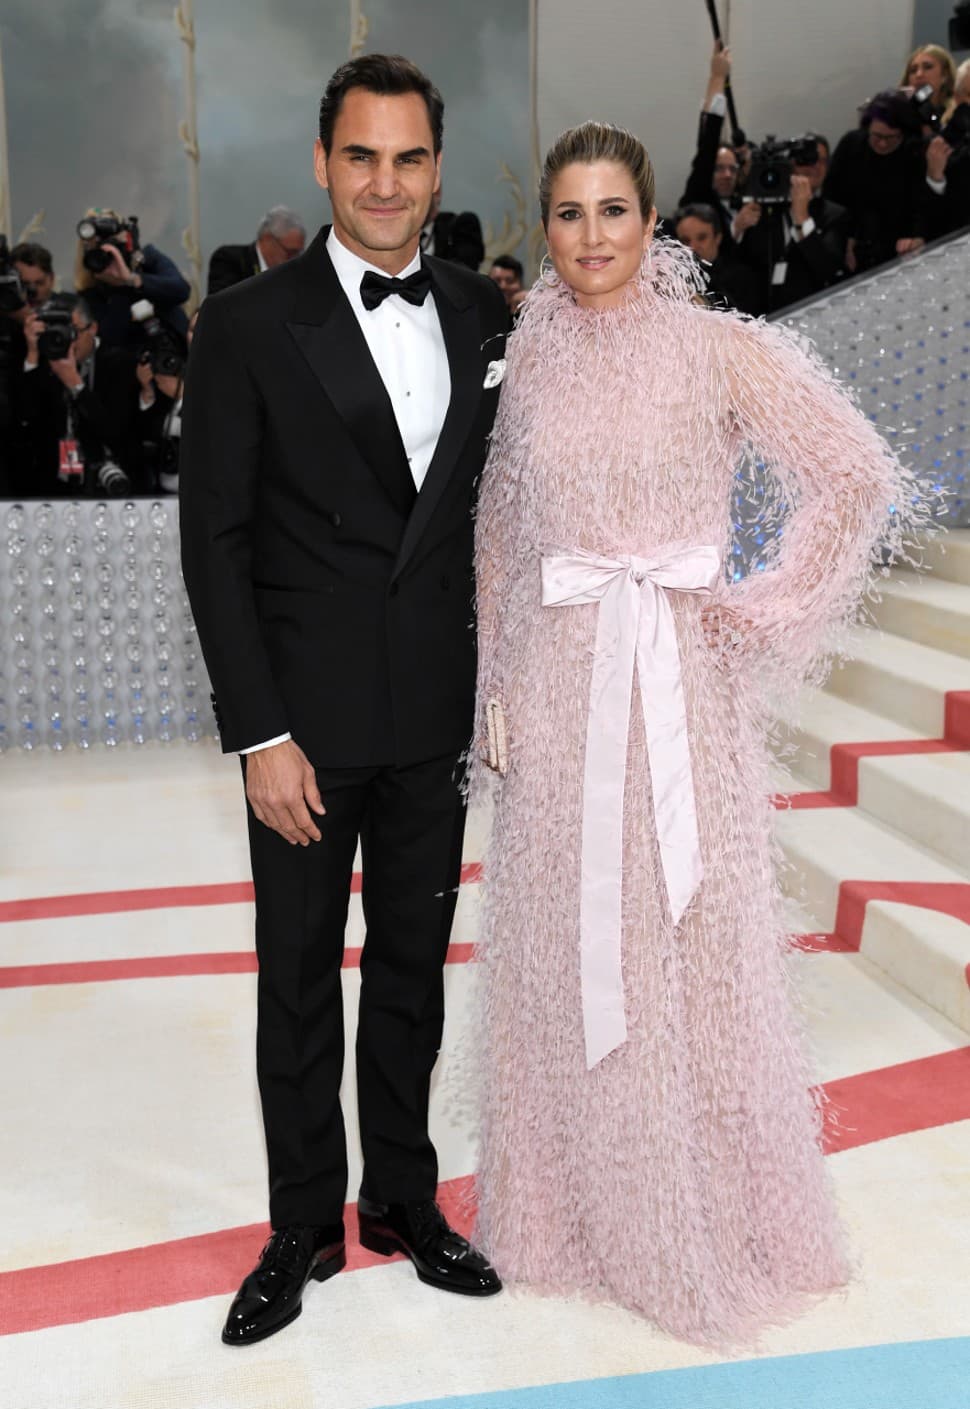 Tennis legend Roger Federer was seen in a sharp black Dior tuxedo at the Met Gala 2023. His wife, Mirka, balanced him out in a feathery long-sleeve gown with a bow accent, one of Lagerfeld's signature accessories. (Photo: AP)